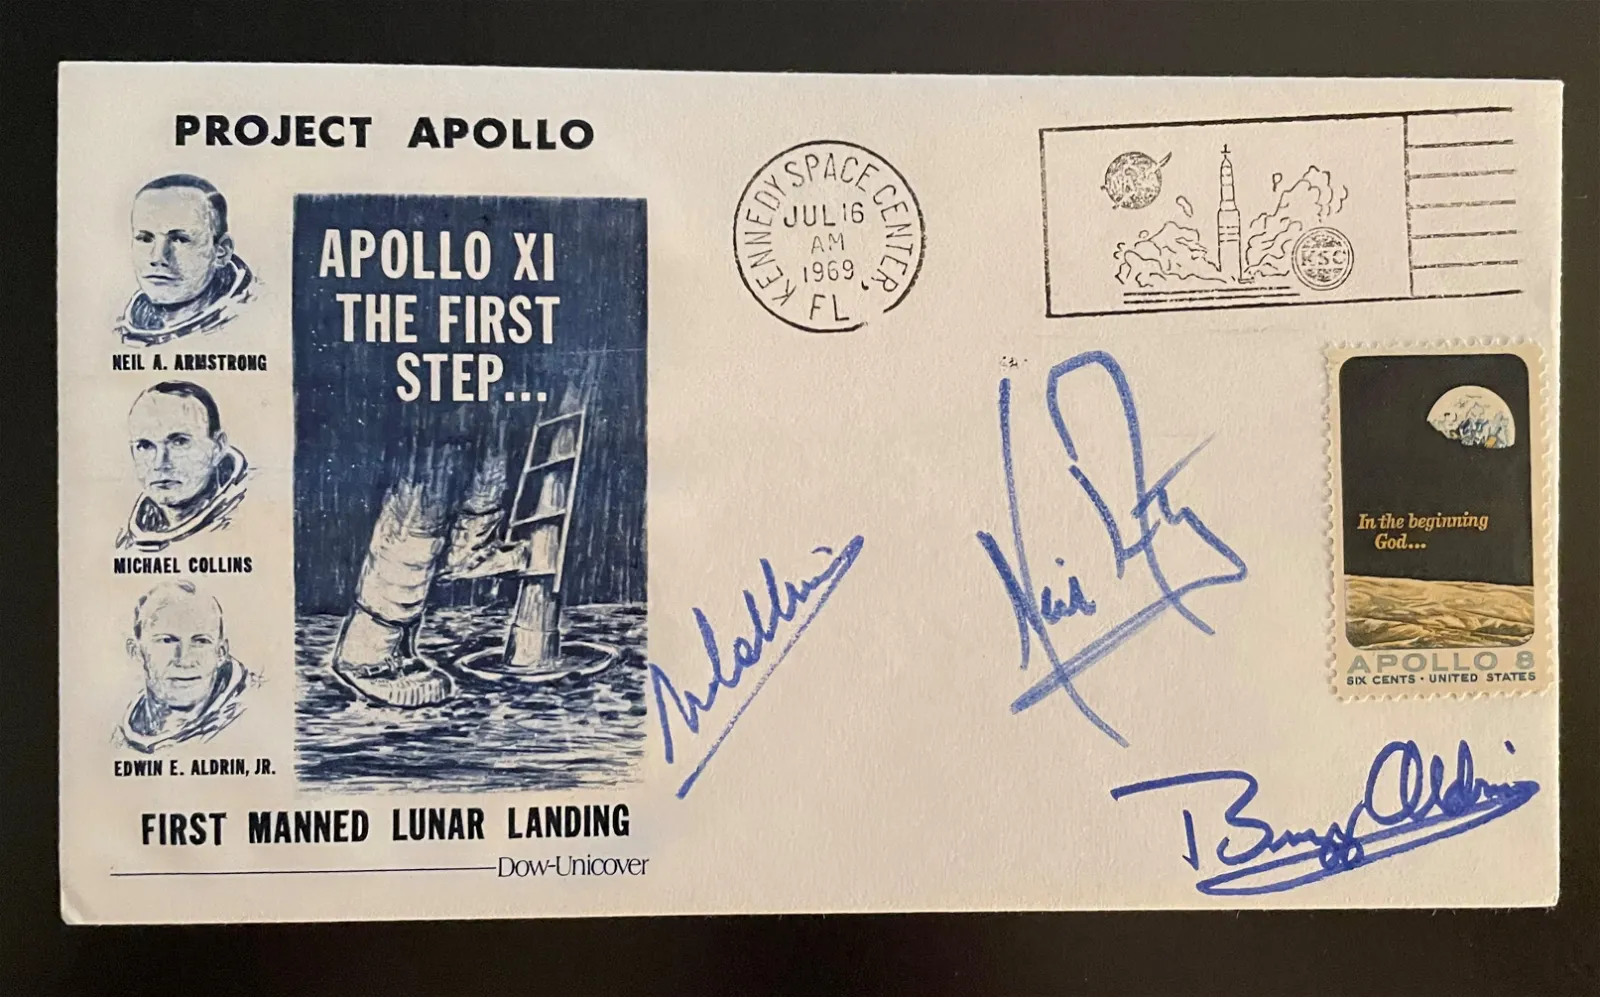 Apollo 11 crew-signed Type 2 insurance cover from the personal collection of Apollo 11 astronaut Michael Collins, est. $6,500-$9,500